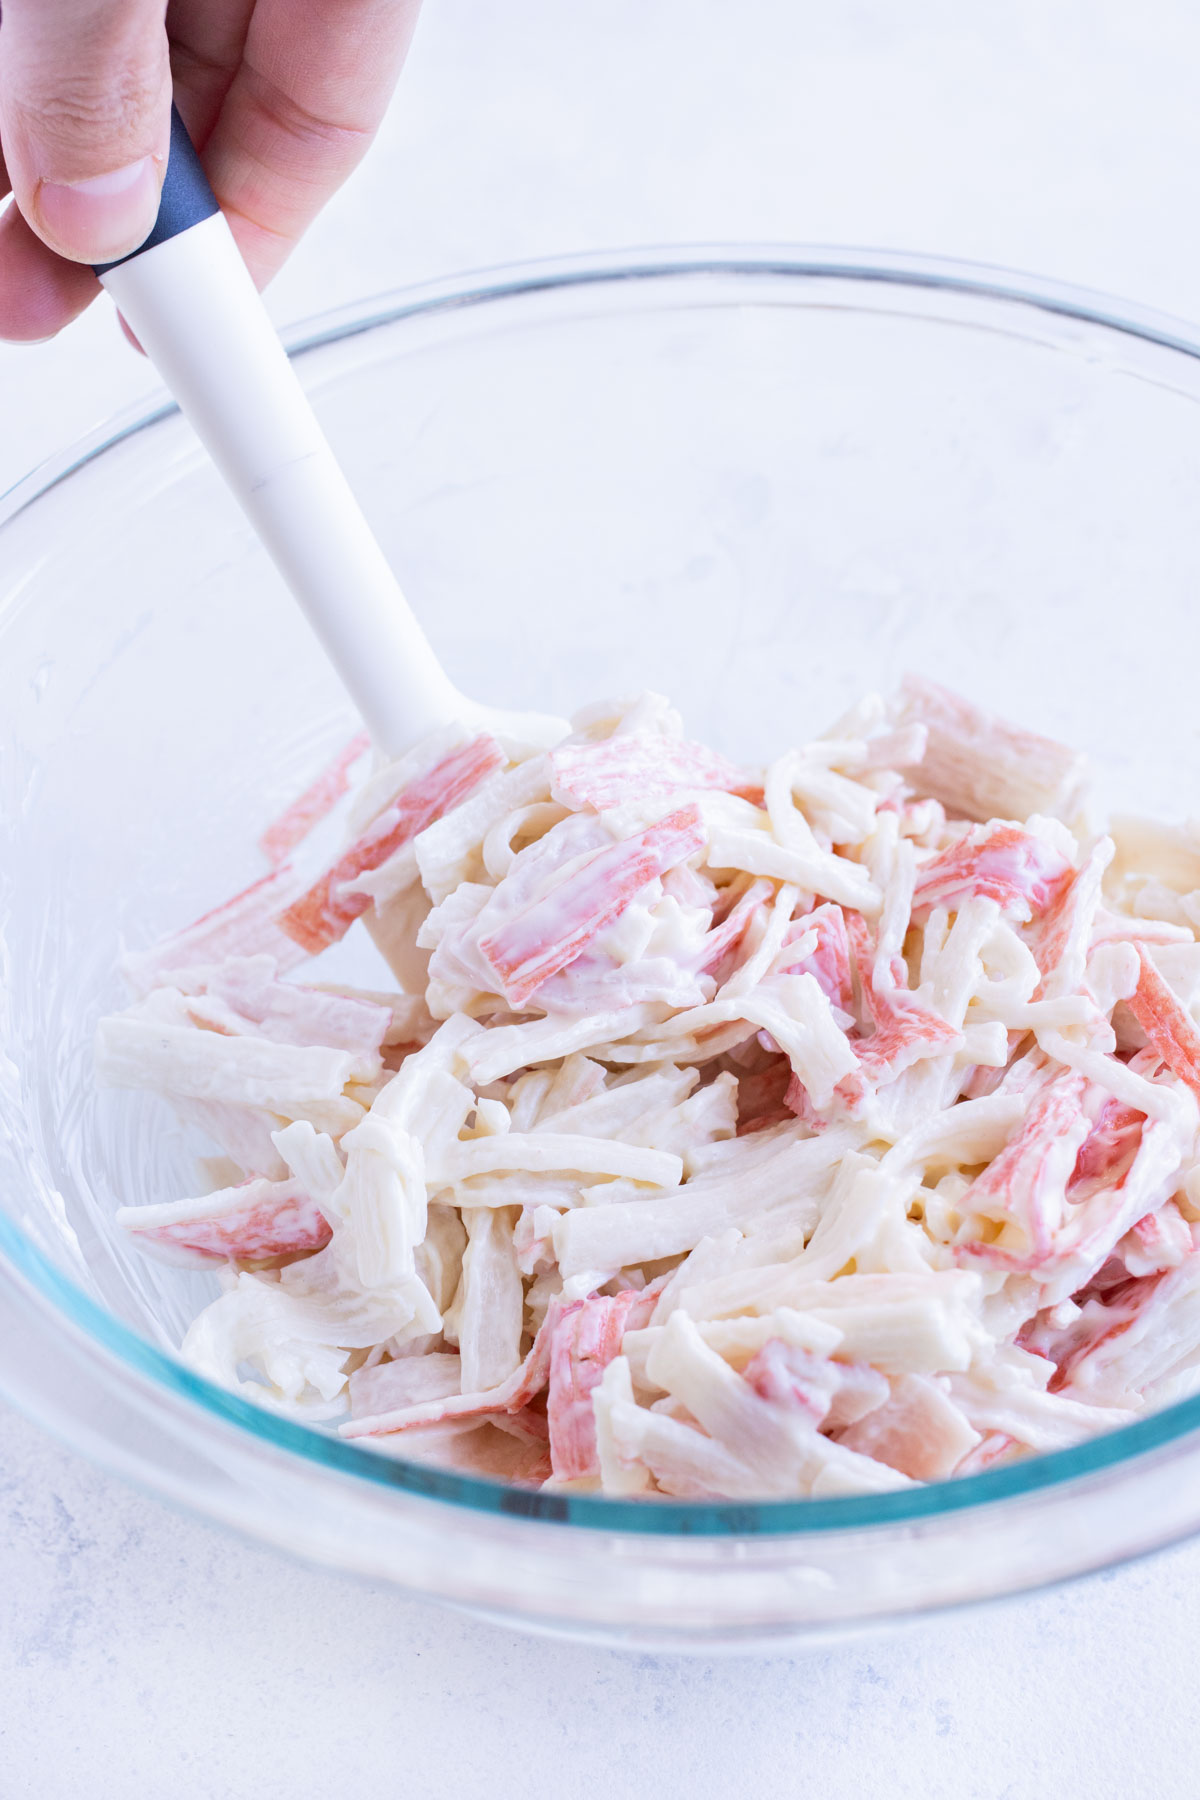 Imitation crab is combined with mayo before filling sushi.